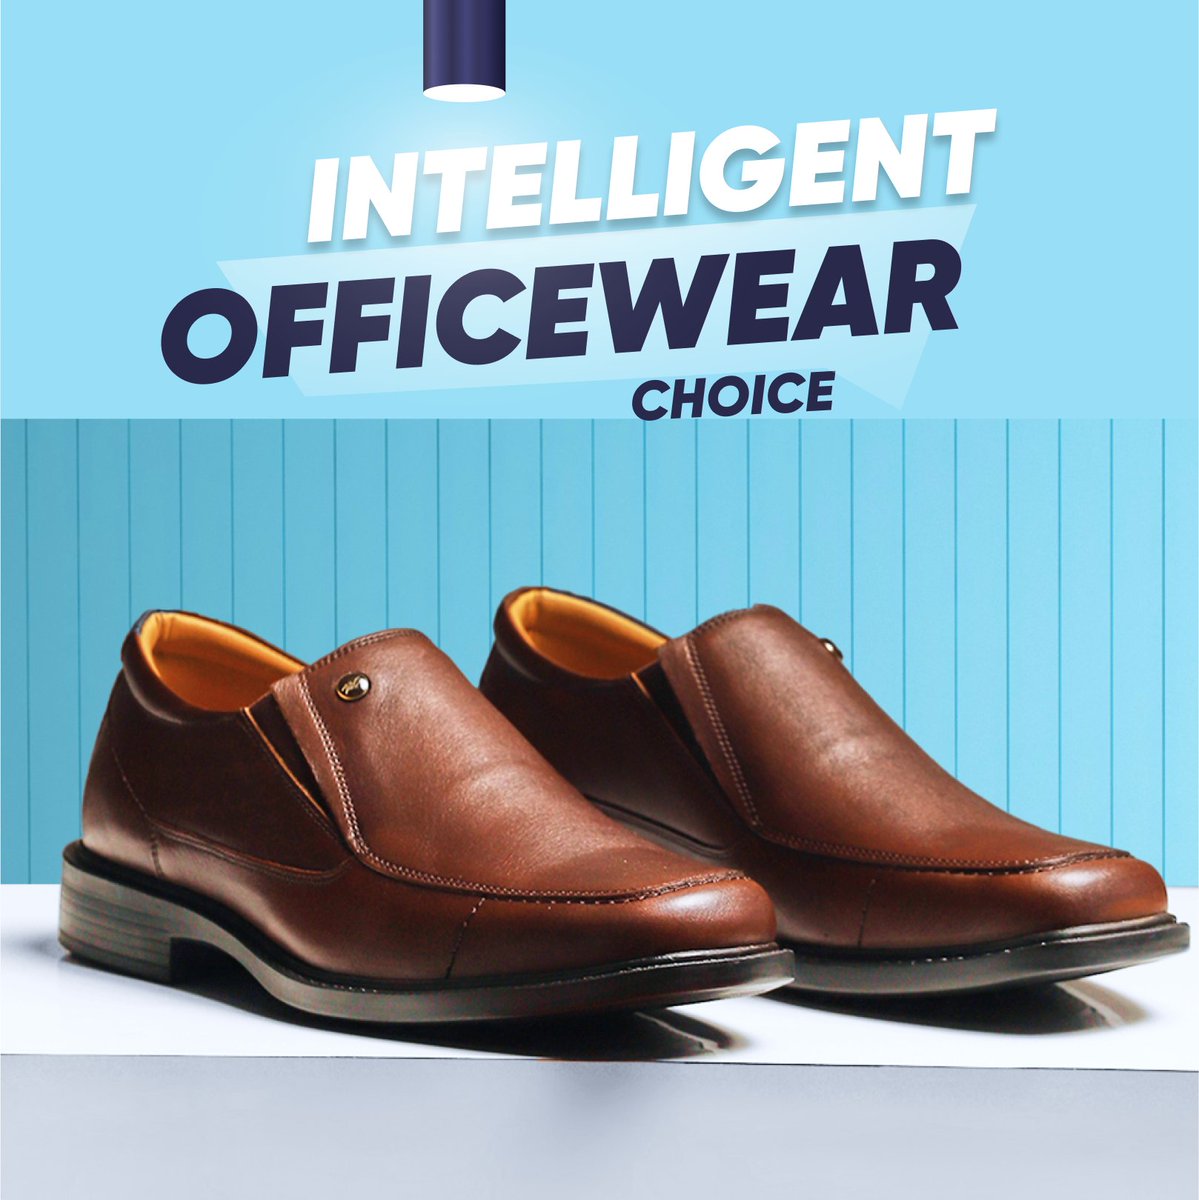 Your search for perfect officewear shoes ends here.
#montecarlo #officewear #footwear #officeshoes #formalshoes #formalshoesmen
#menshoes #shoestyle